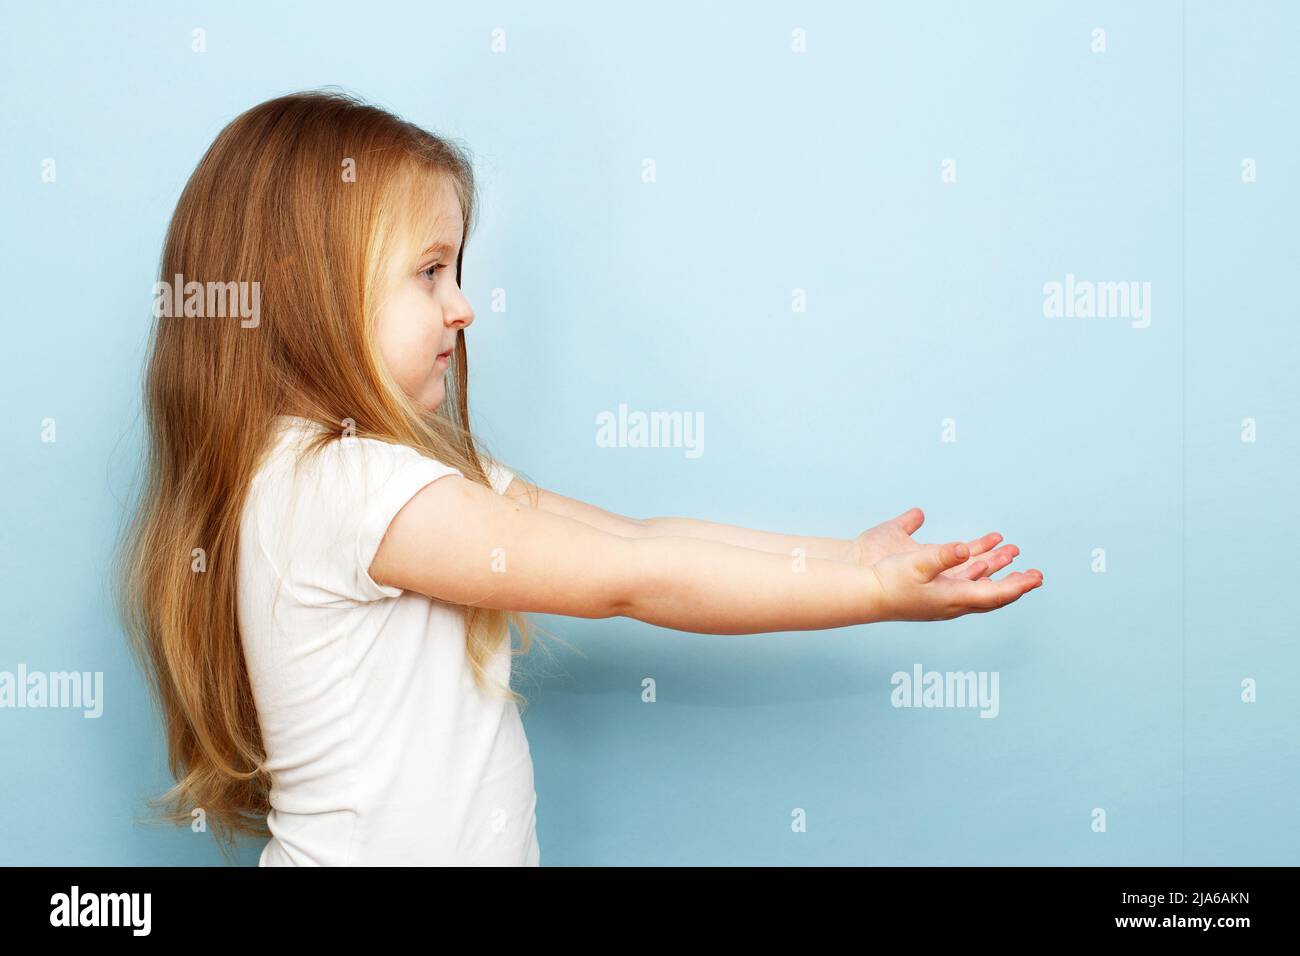 little blonde girl with long hair stretched her arms to the side. child holding open palm empty hand on a blue background Stock Photo